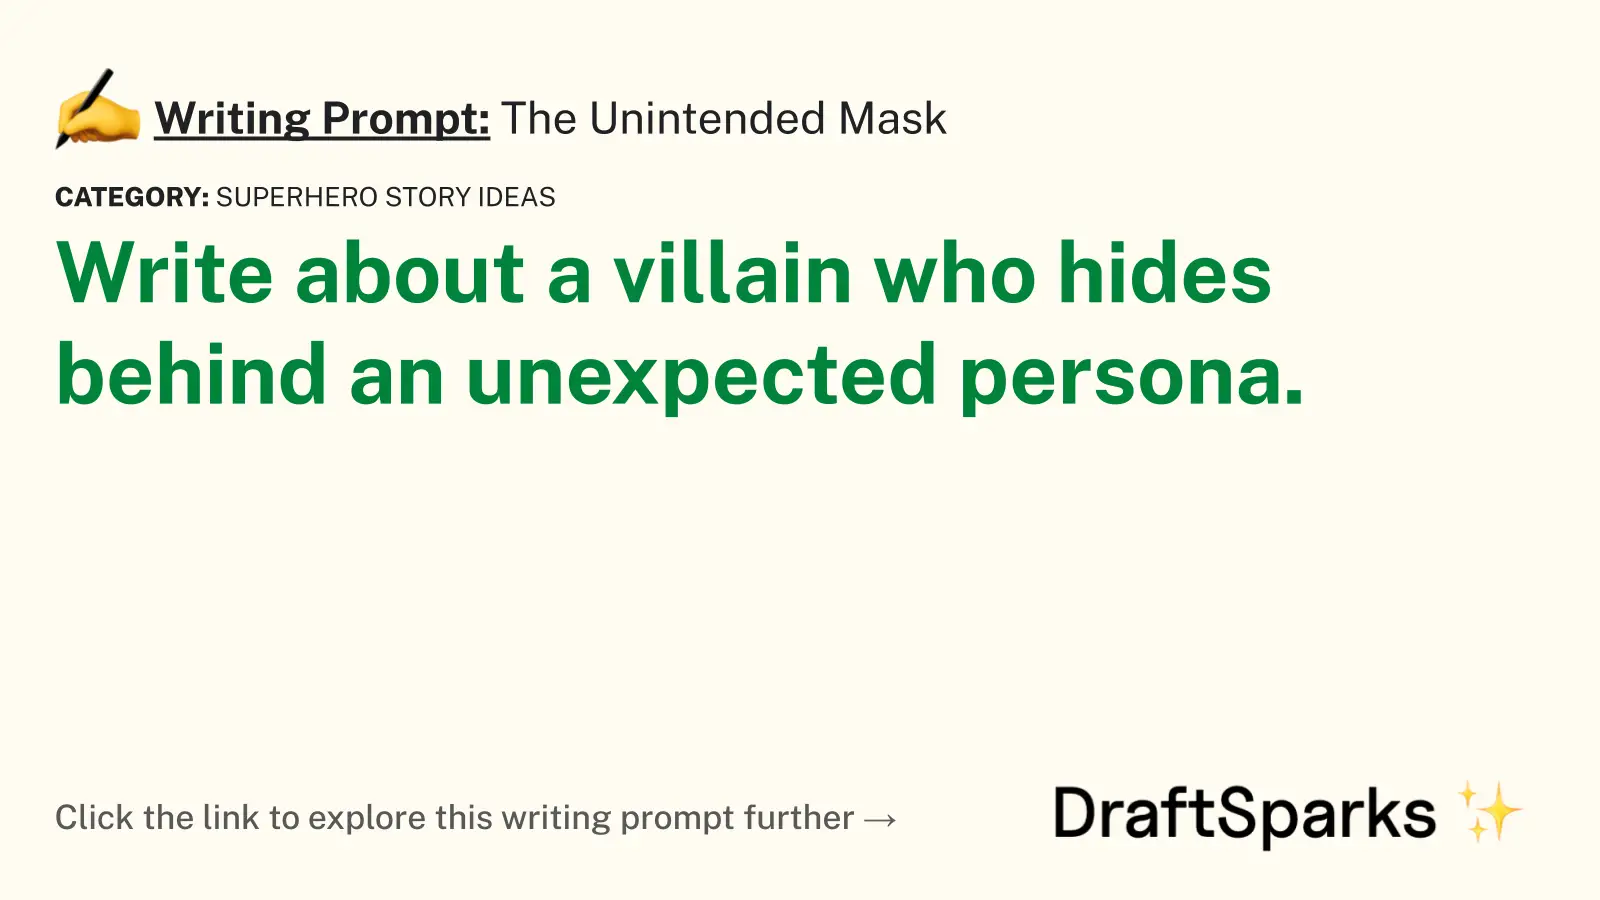 The Unintended Mask